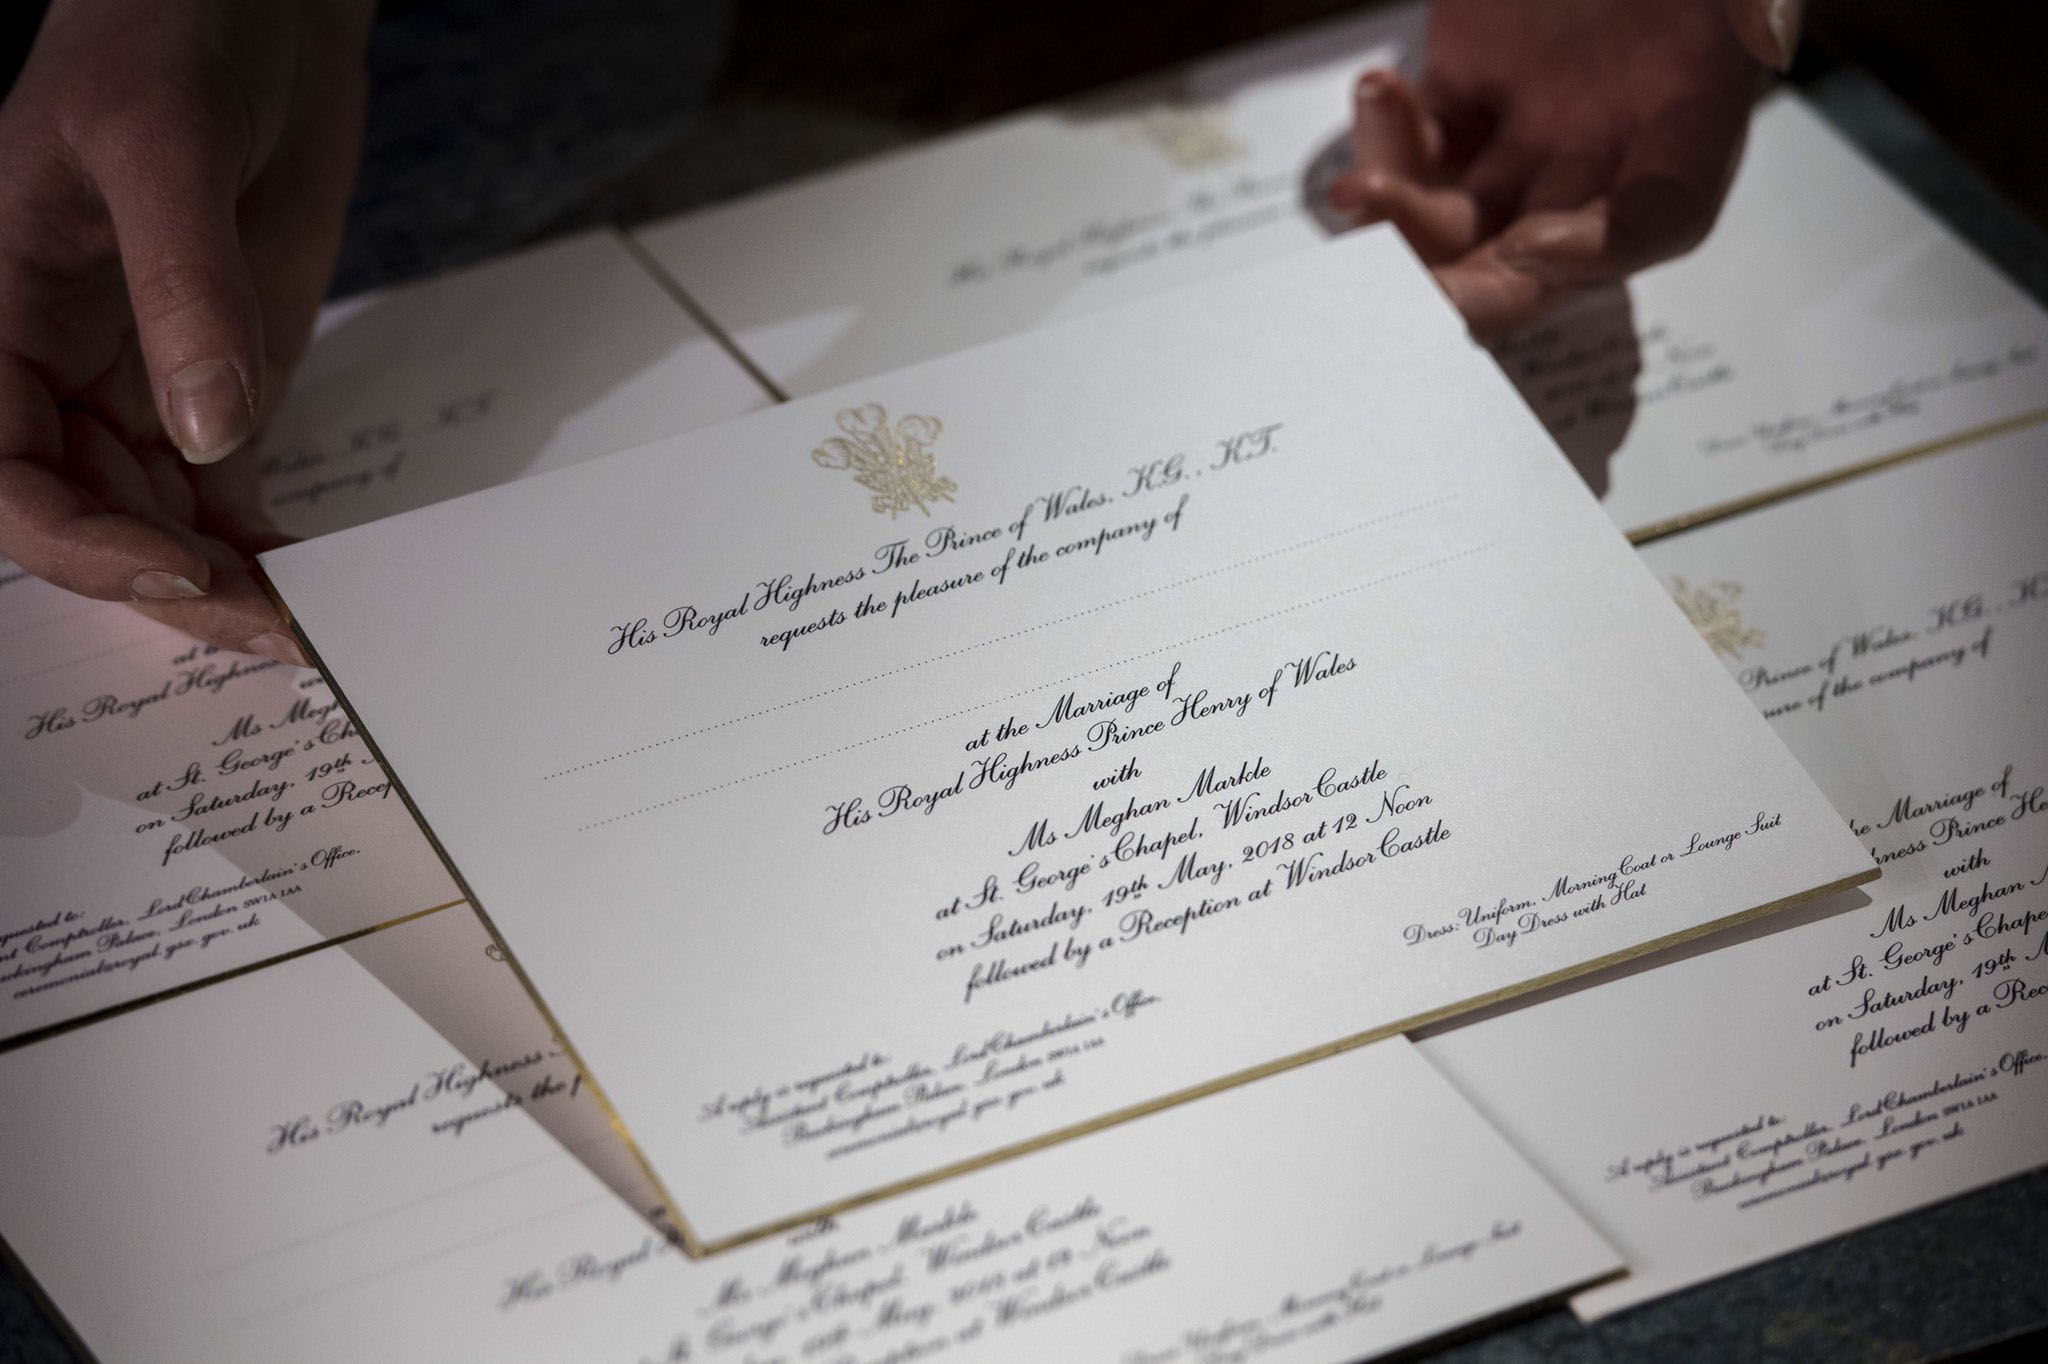 PHOTO: The invitations follow many years of Royal tradition and have been made by @BarnardWestwood. They feature the Three-Feathered Badge of the Prince of Wales printed in gold ink.